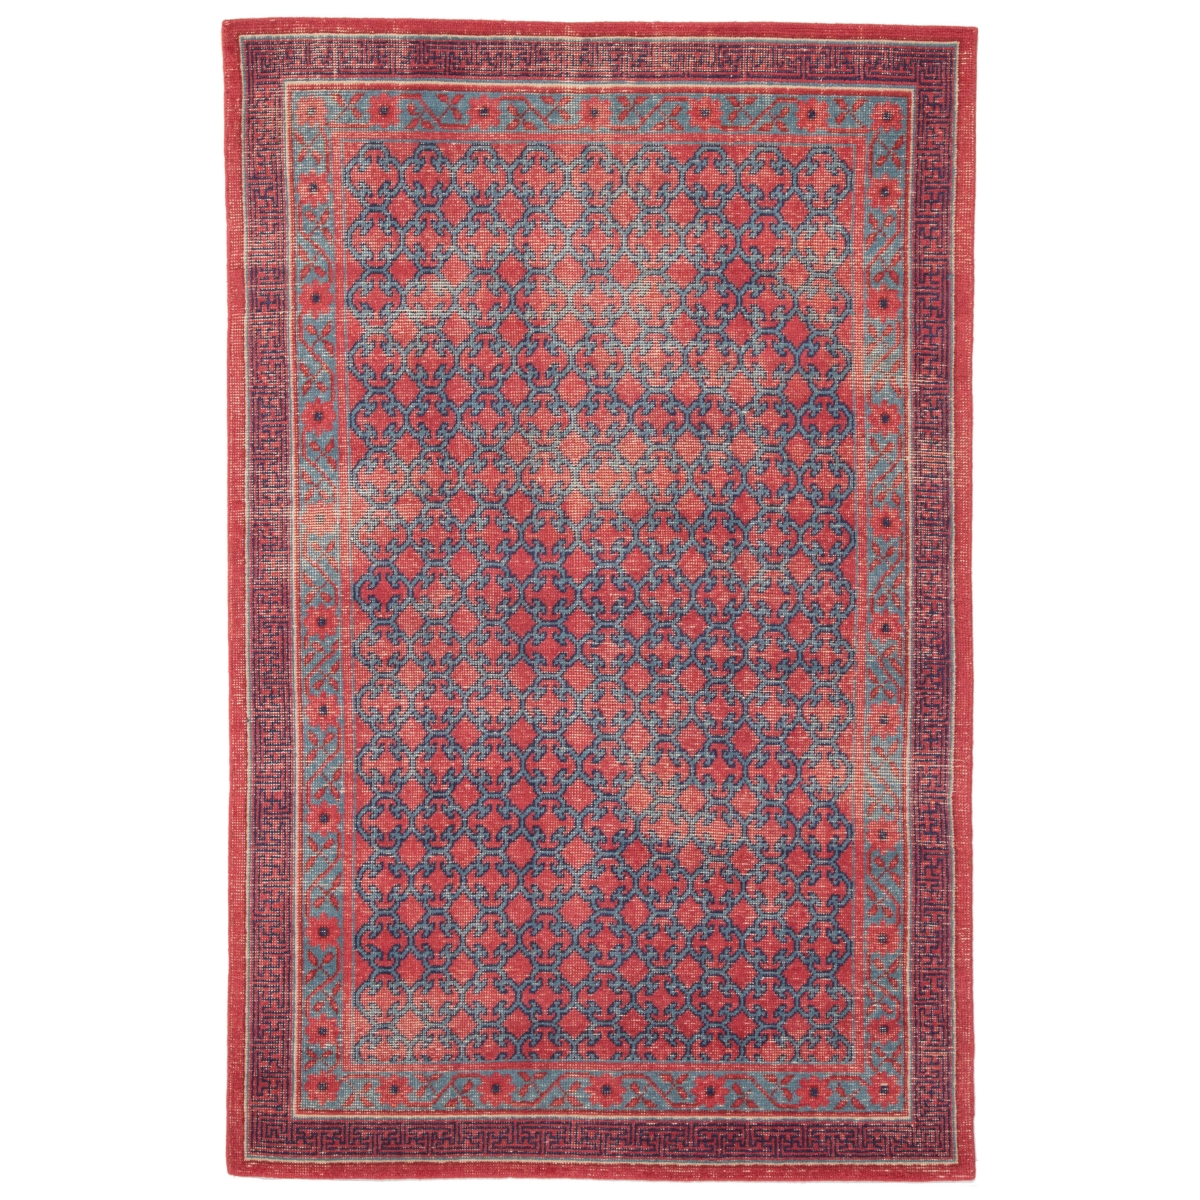 Rug129794 9 X 12 Ft. Revolution Concord Hand-knotted Medallion Red & Blue Area Rug